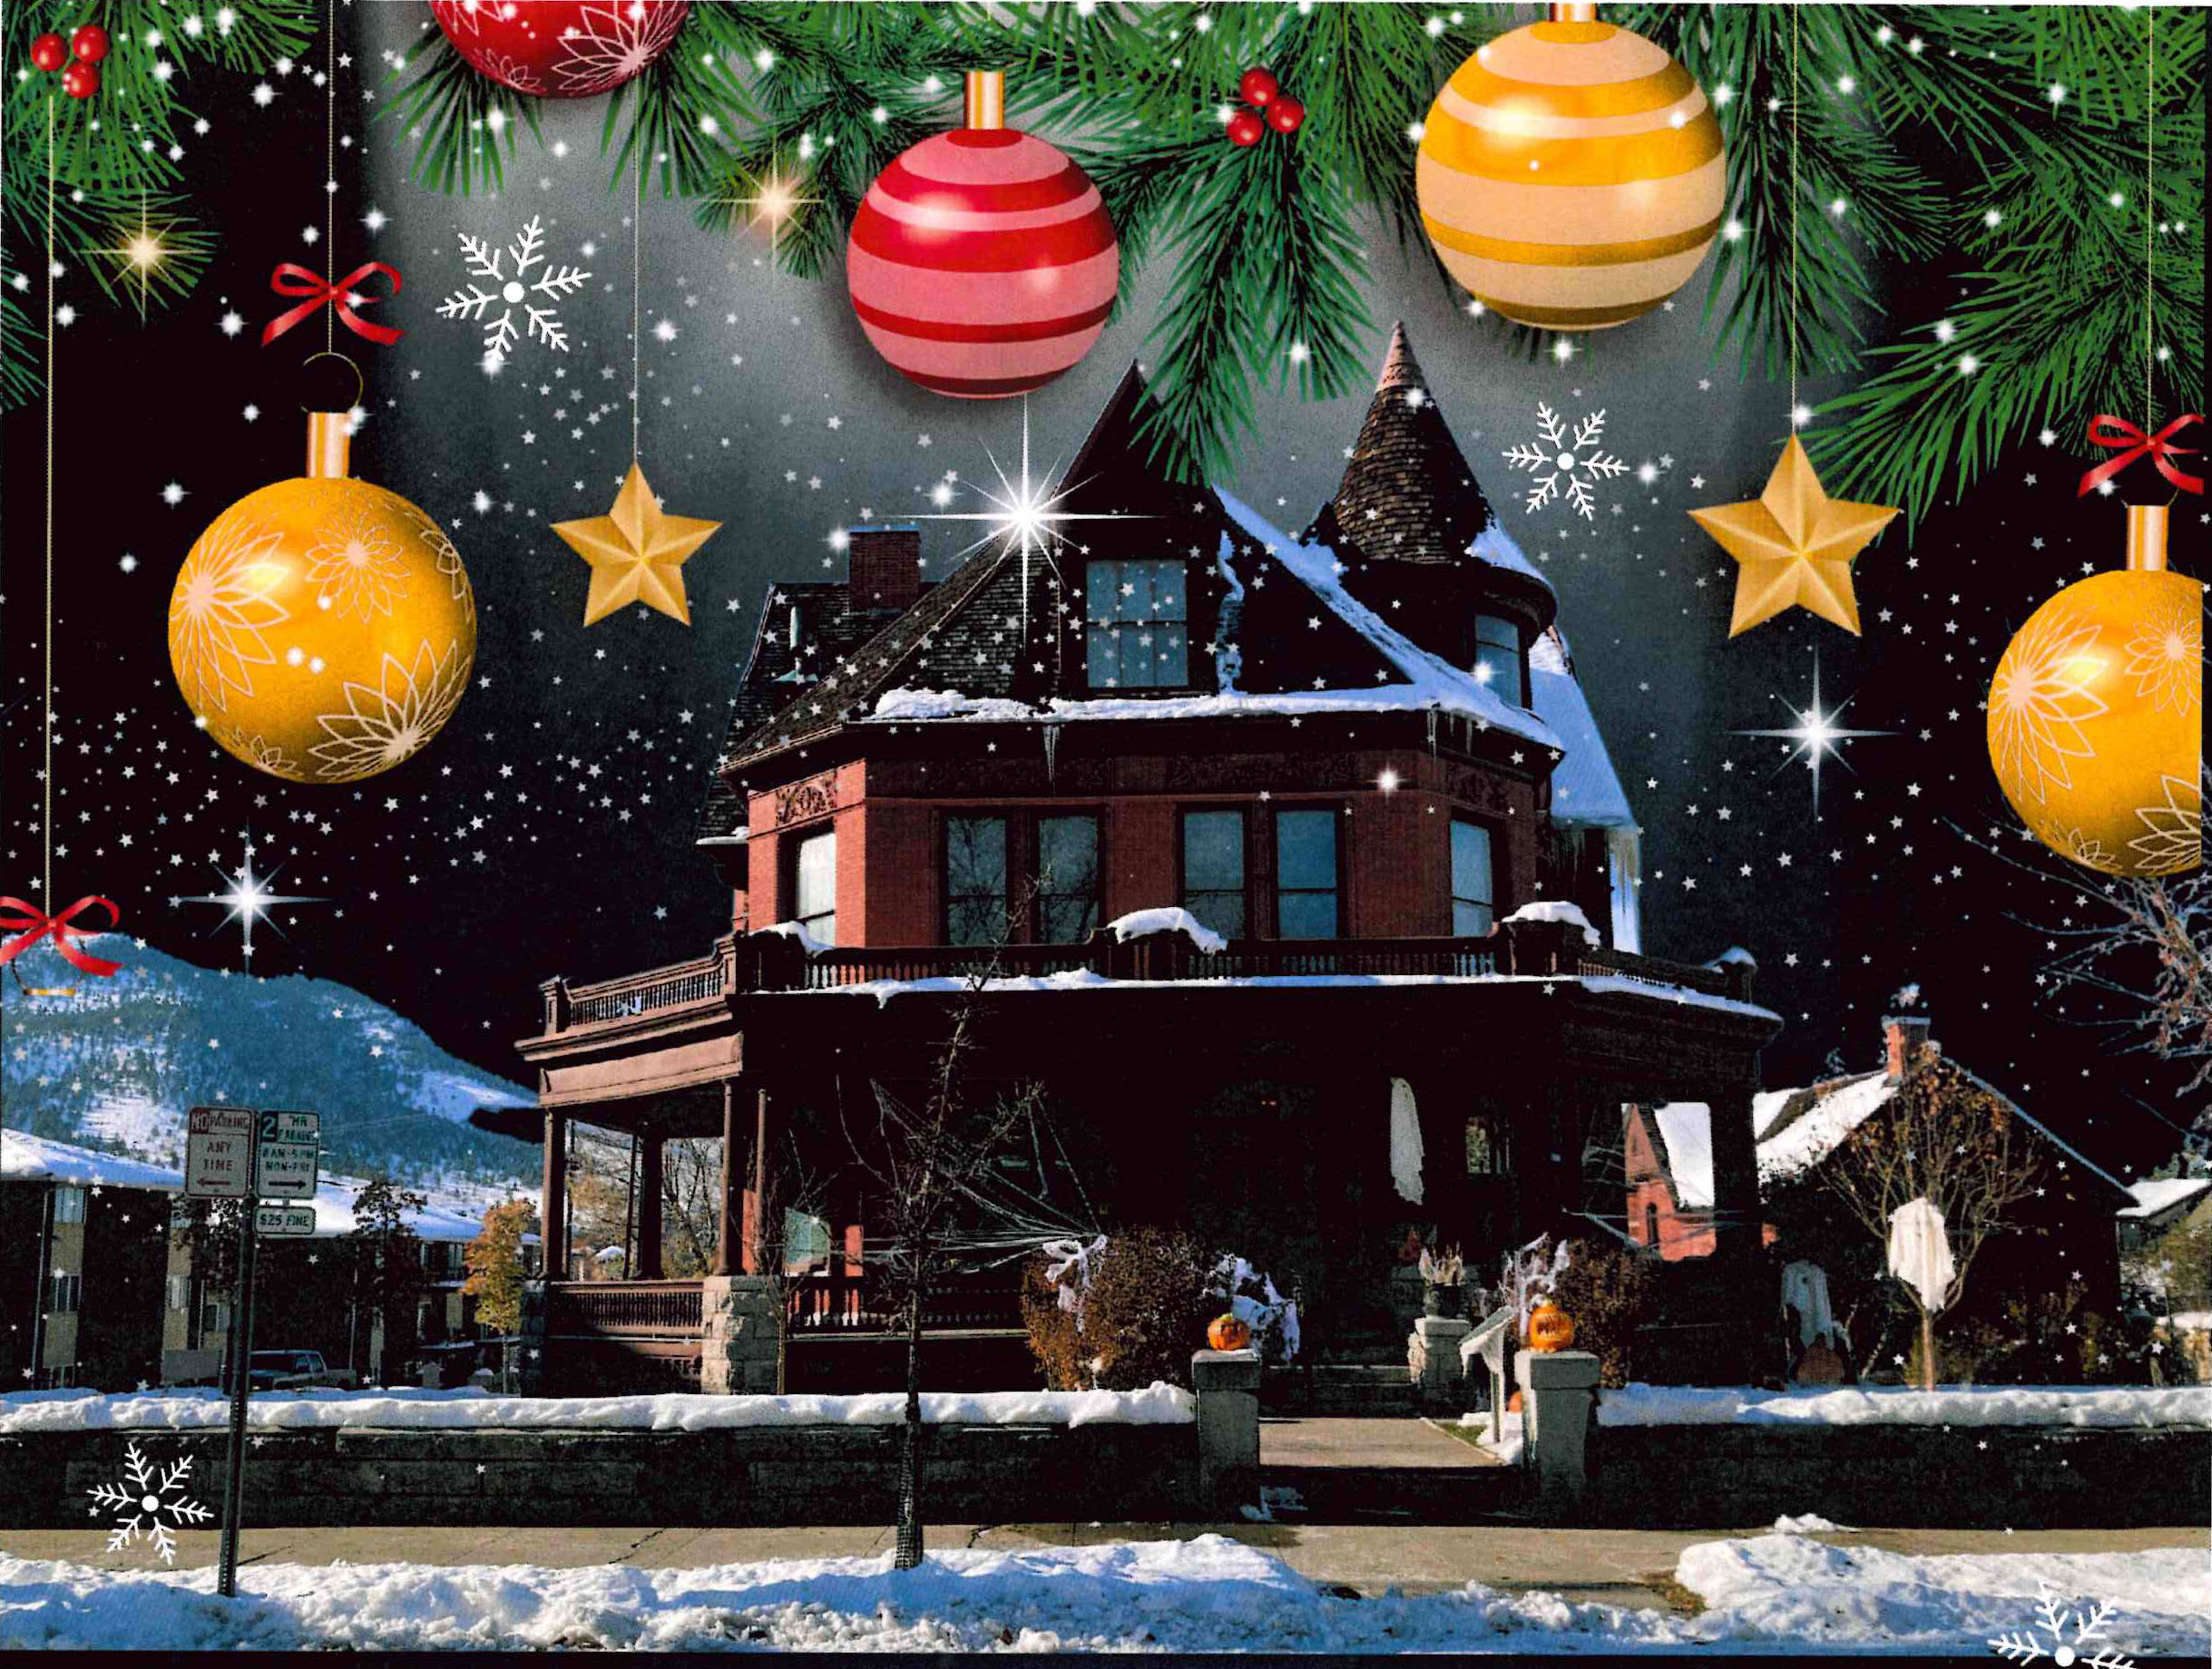 Festive Christmas generated artwork of the Original Governor's Mansion in Helena, Montana